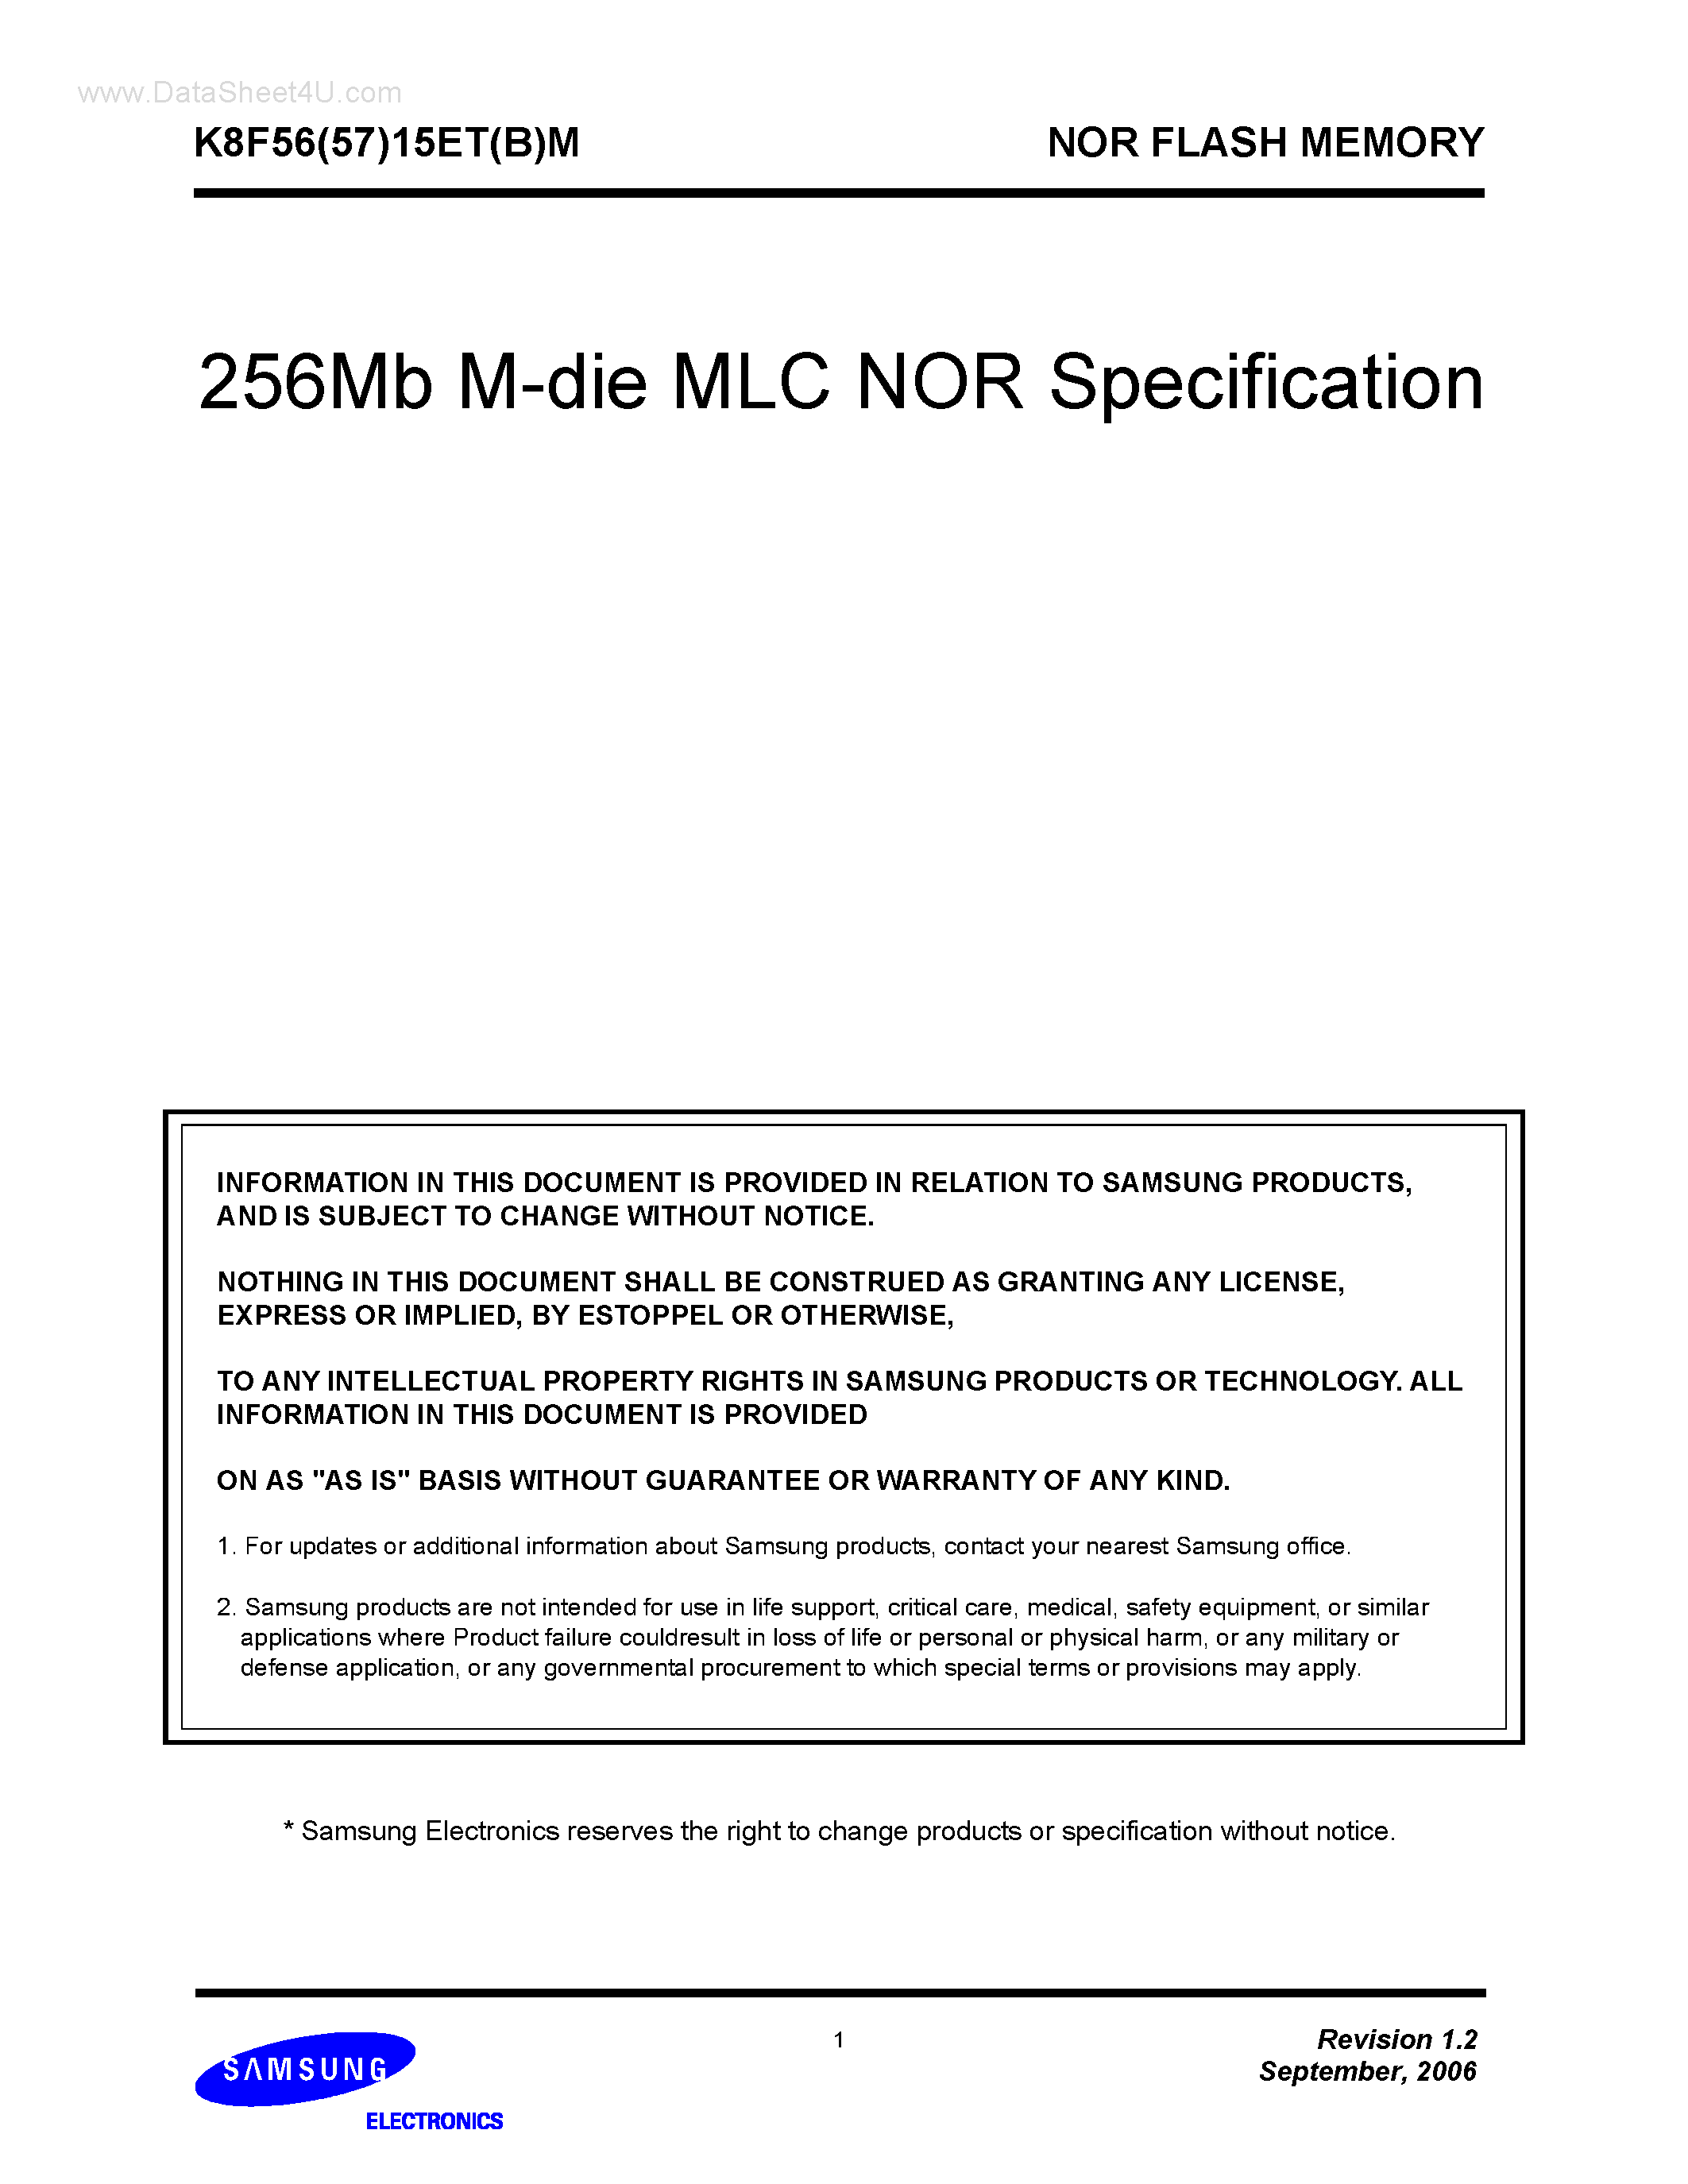 Datasheet K8F5615EBM - 256Mb M-die MLC NOR Specification page 1